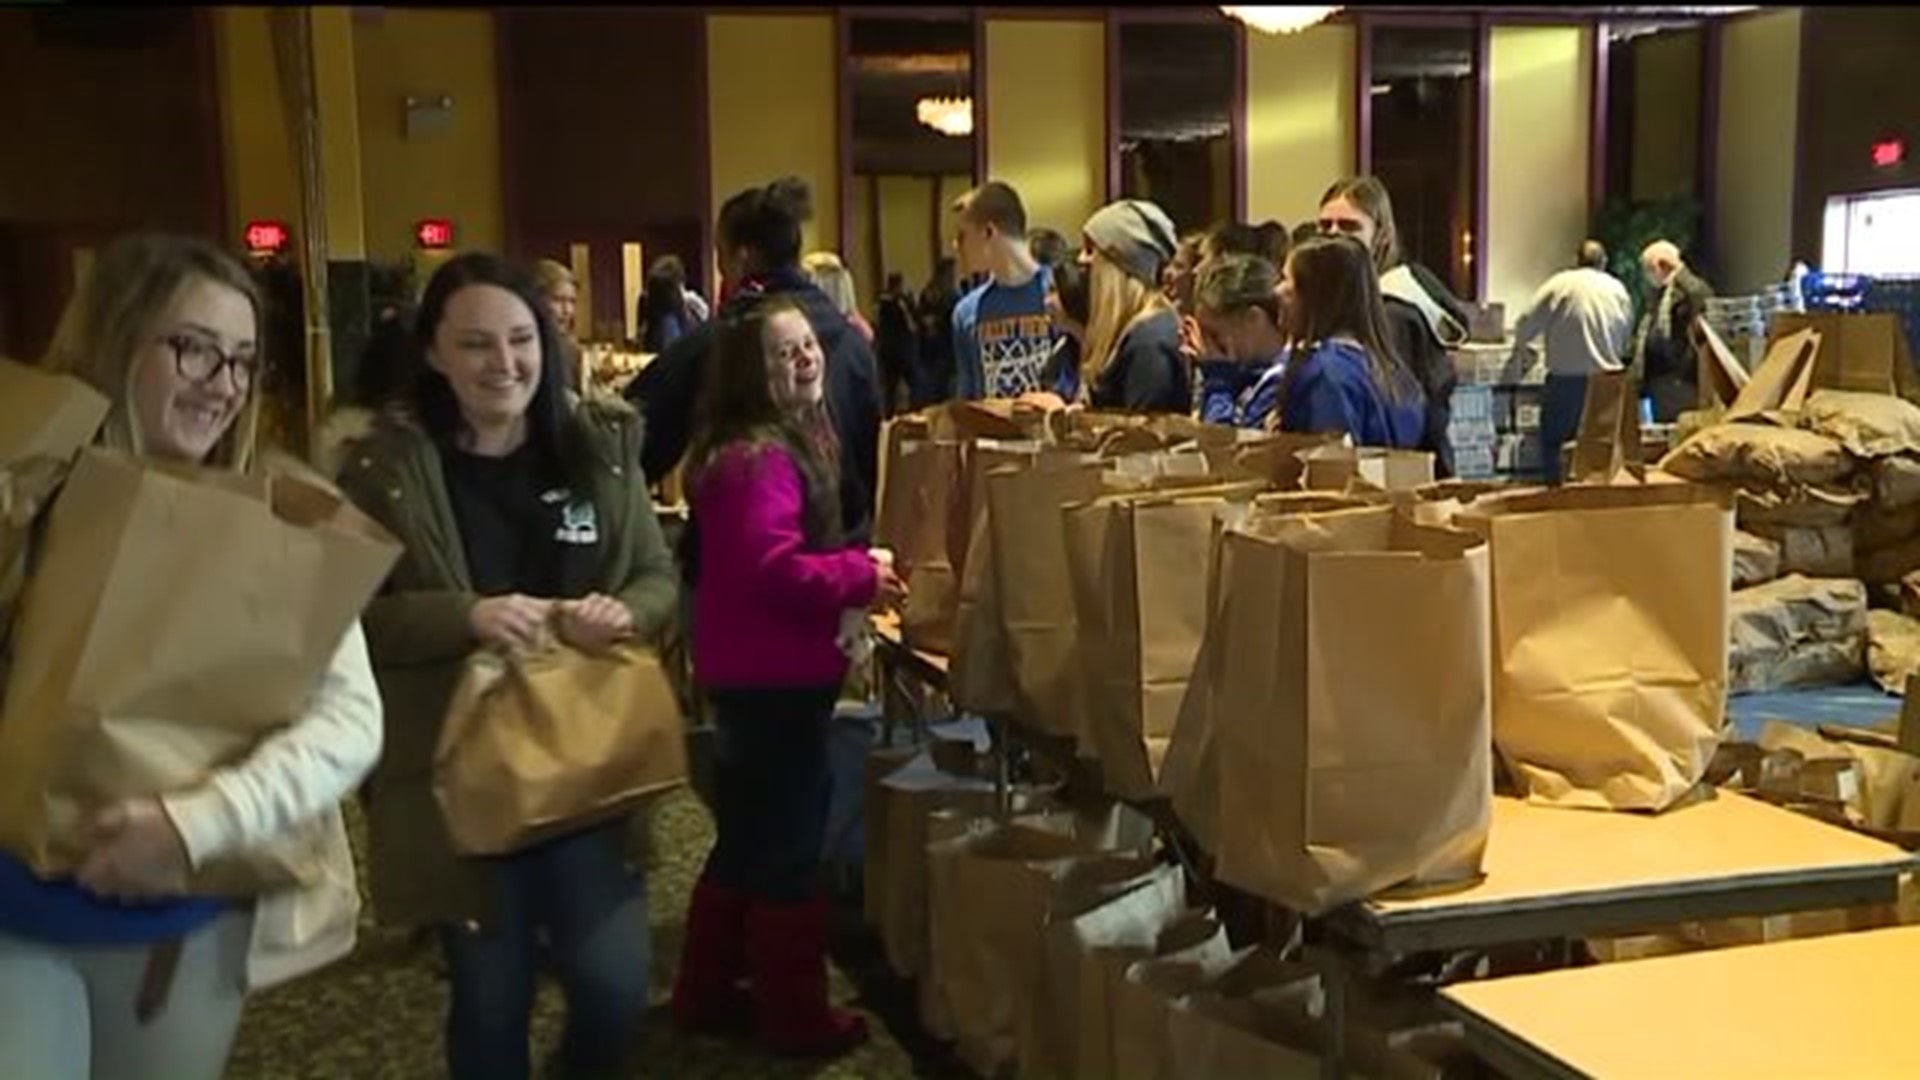 Feed A Friend Giveaway for More than 1,700 Families